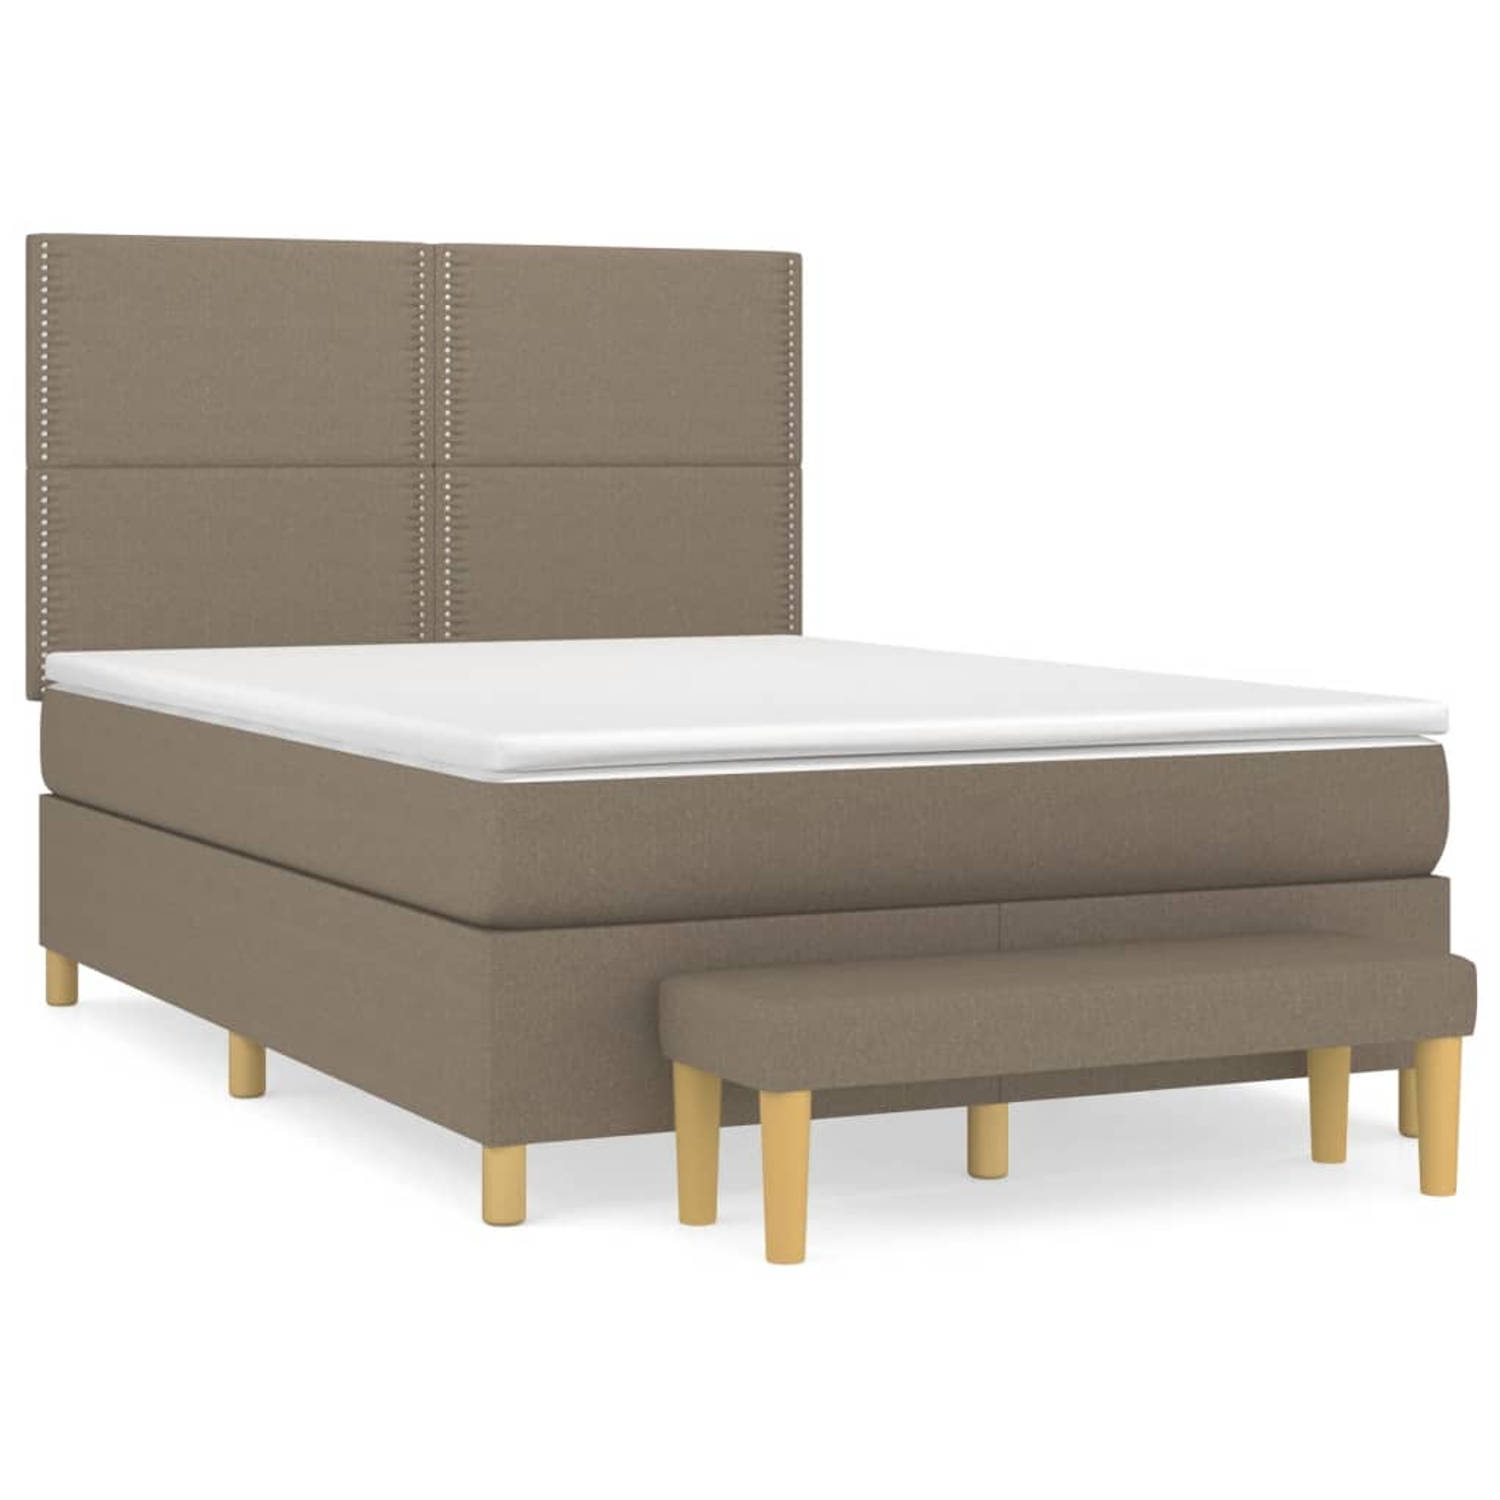 The Living Store Boxspring met matras stof taupe 140x200 cm - Boxspring - Boxsprings - Pocketveringbed - Bed - Slaapmeubel - Boxspringbed - Boxspring Bed - Eenpersoonsbed - Bed Met